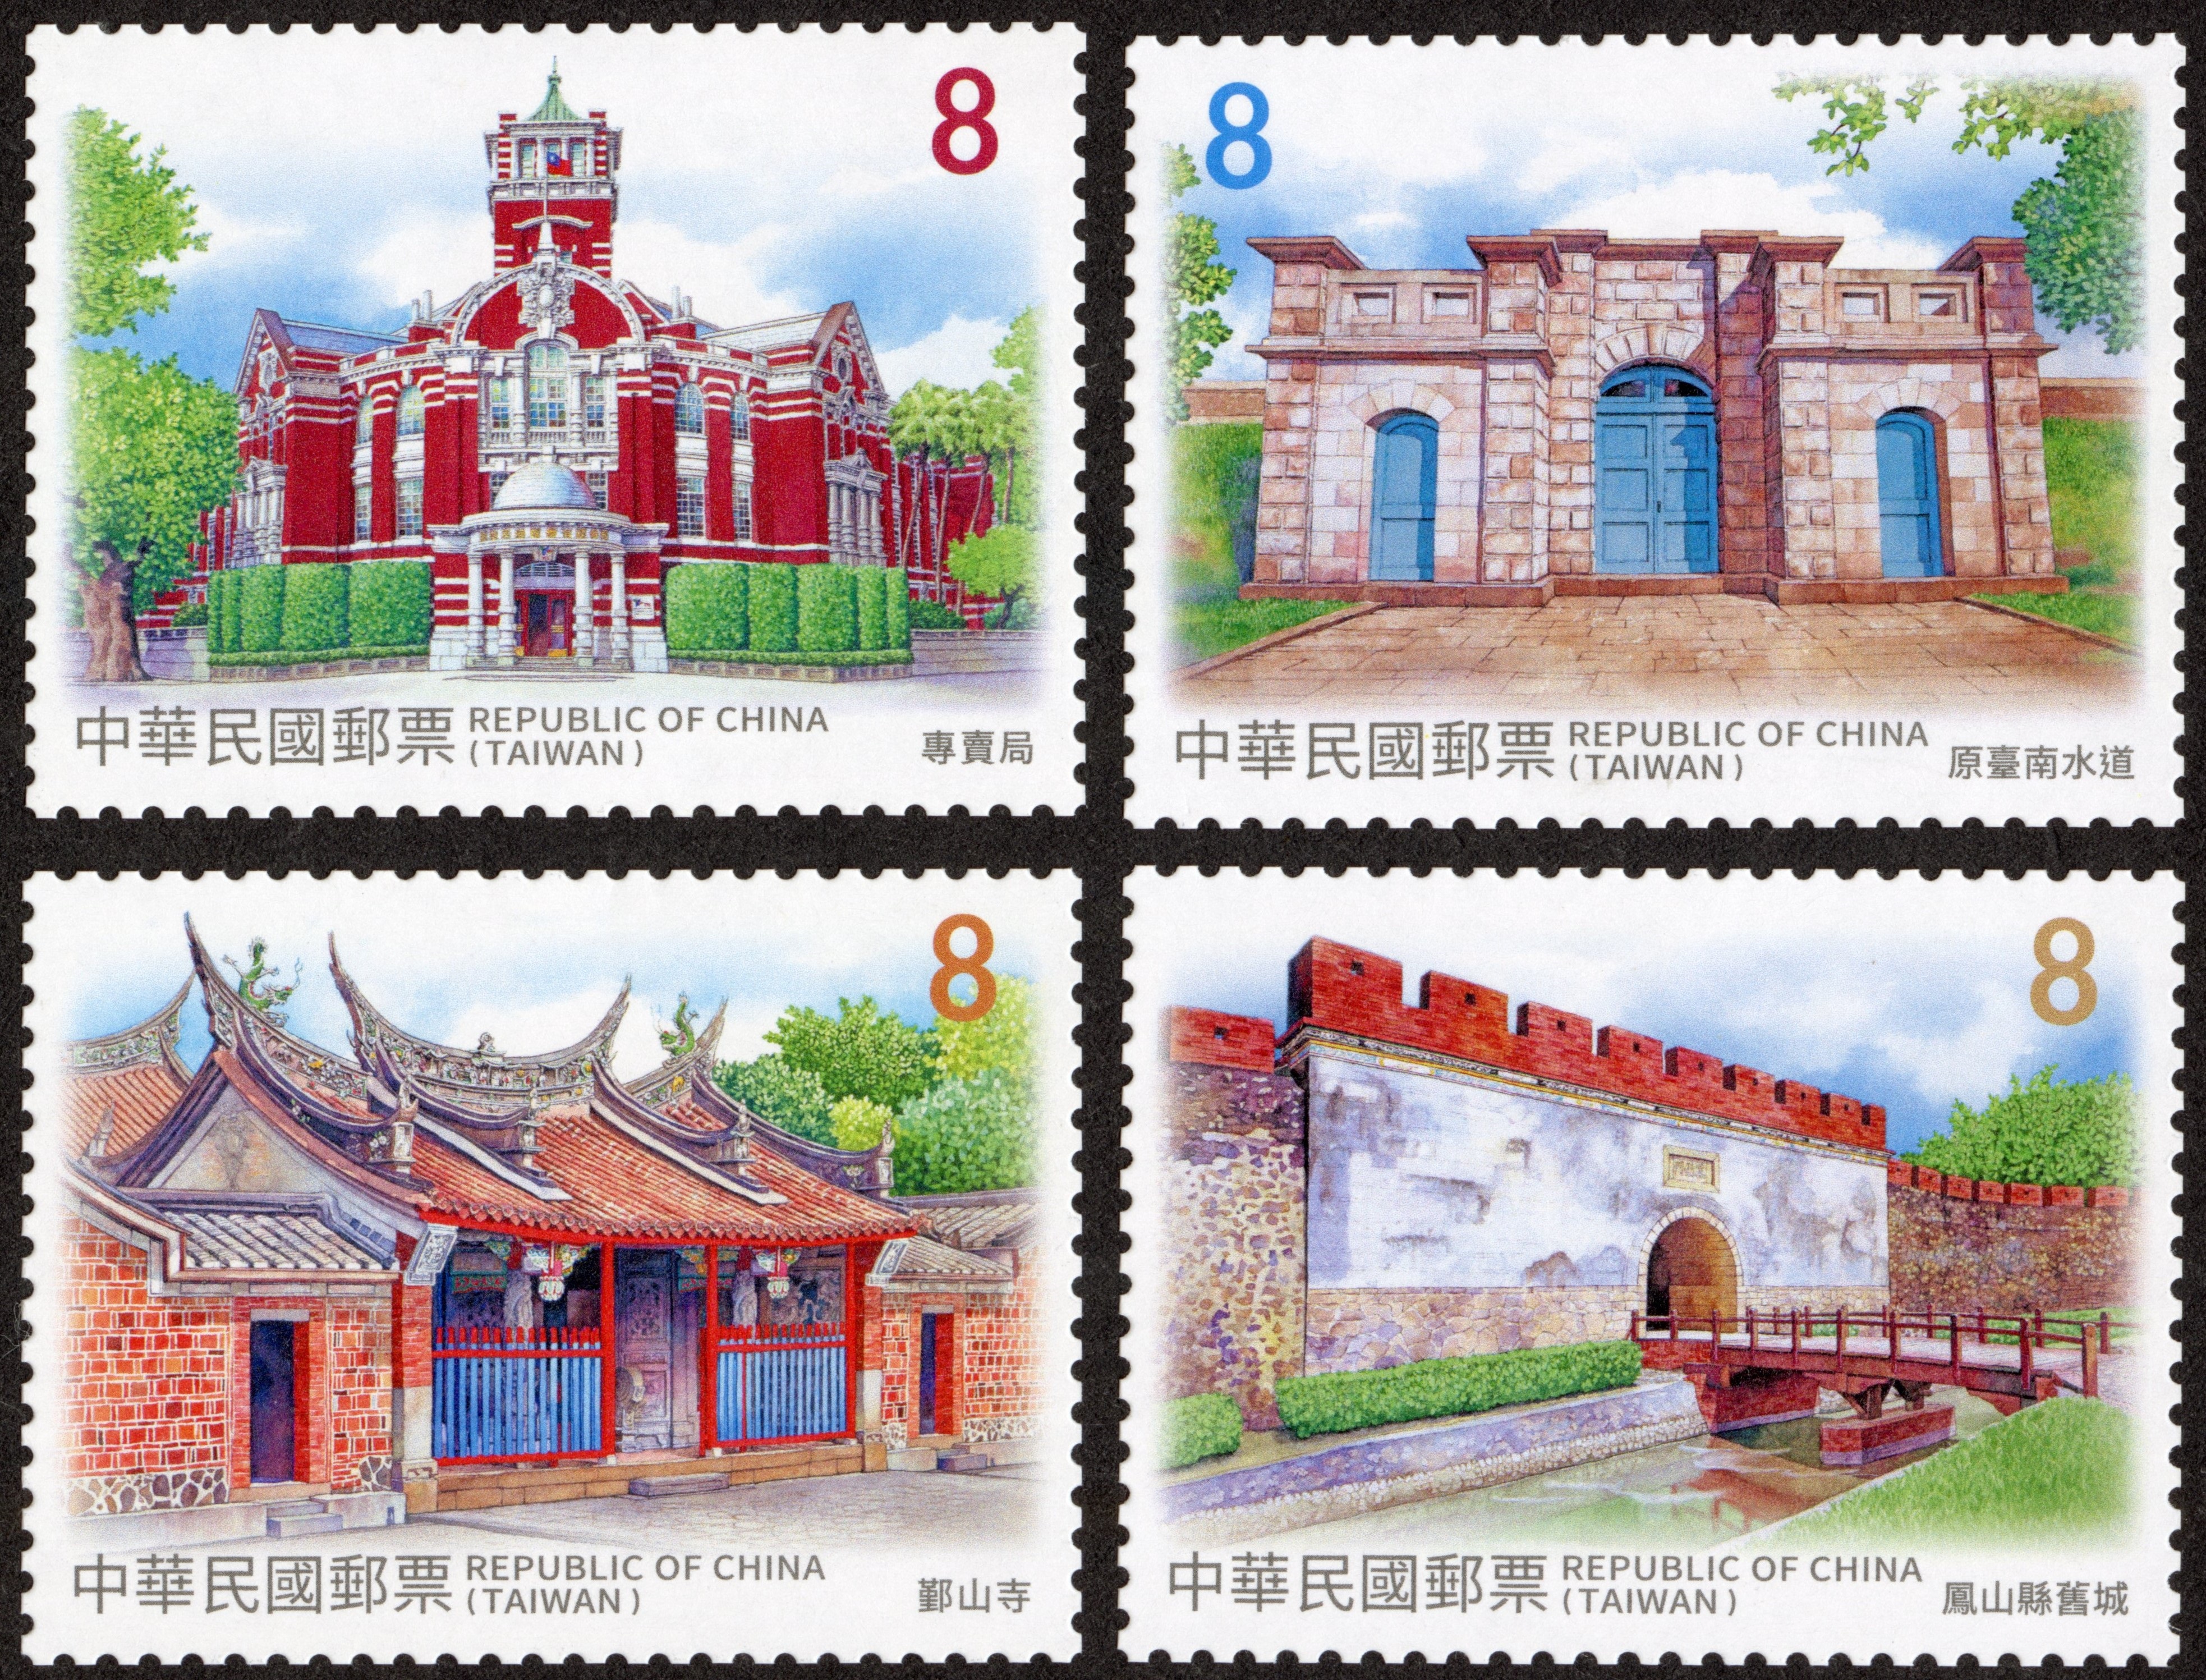 Taiwan Relics Postage Stamps (Issue of 2022)